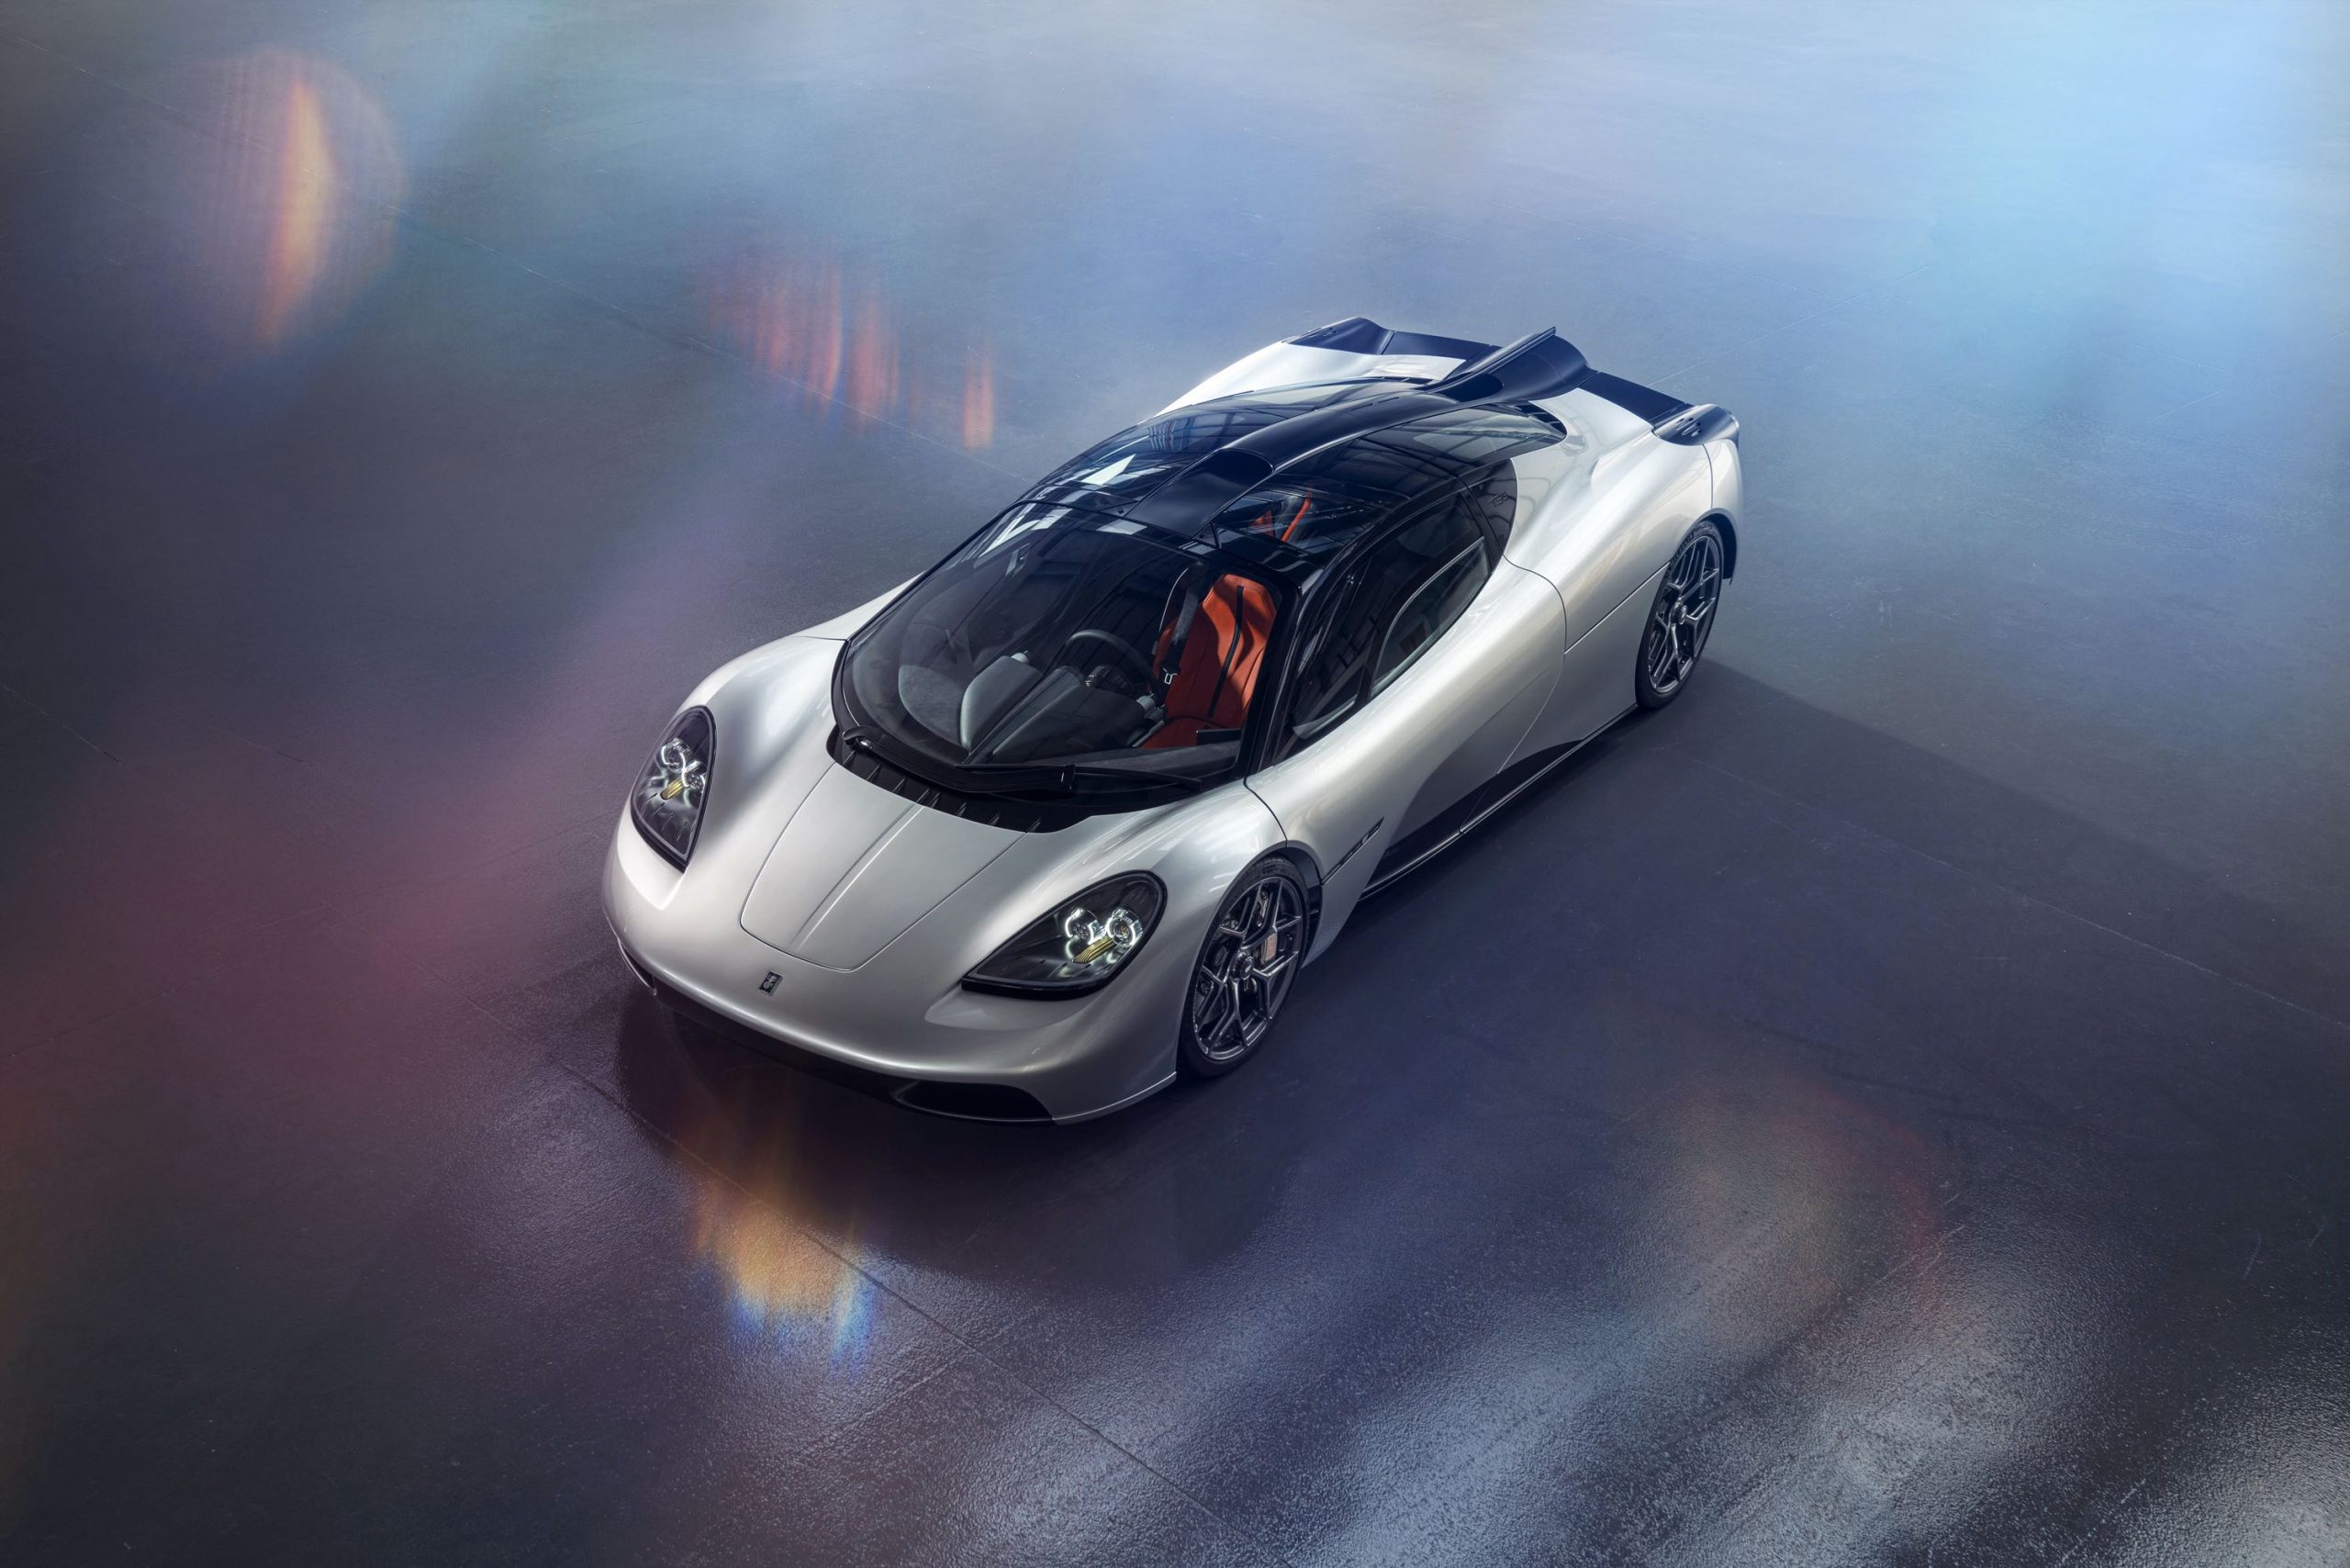 Gordon Murray does it again: the supercar master reveals his new T.50